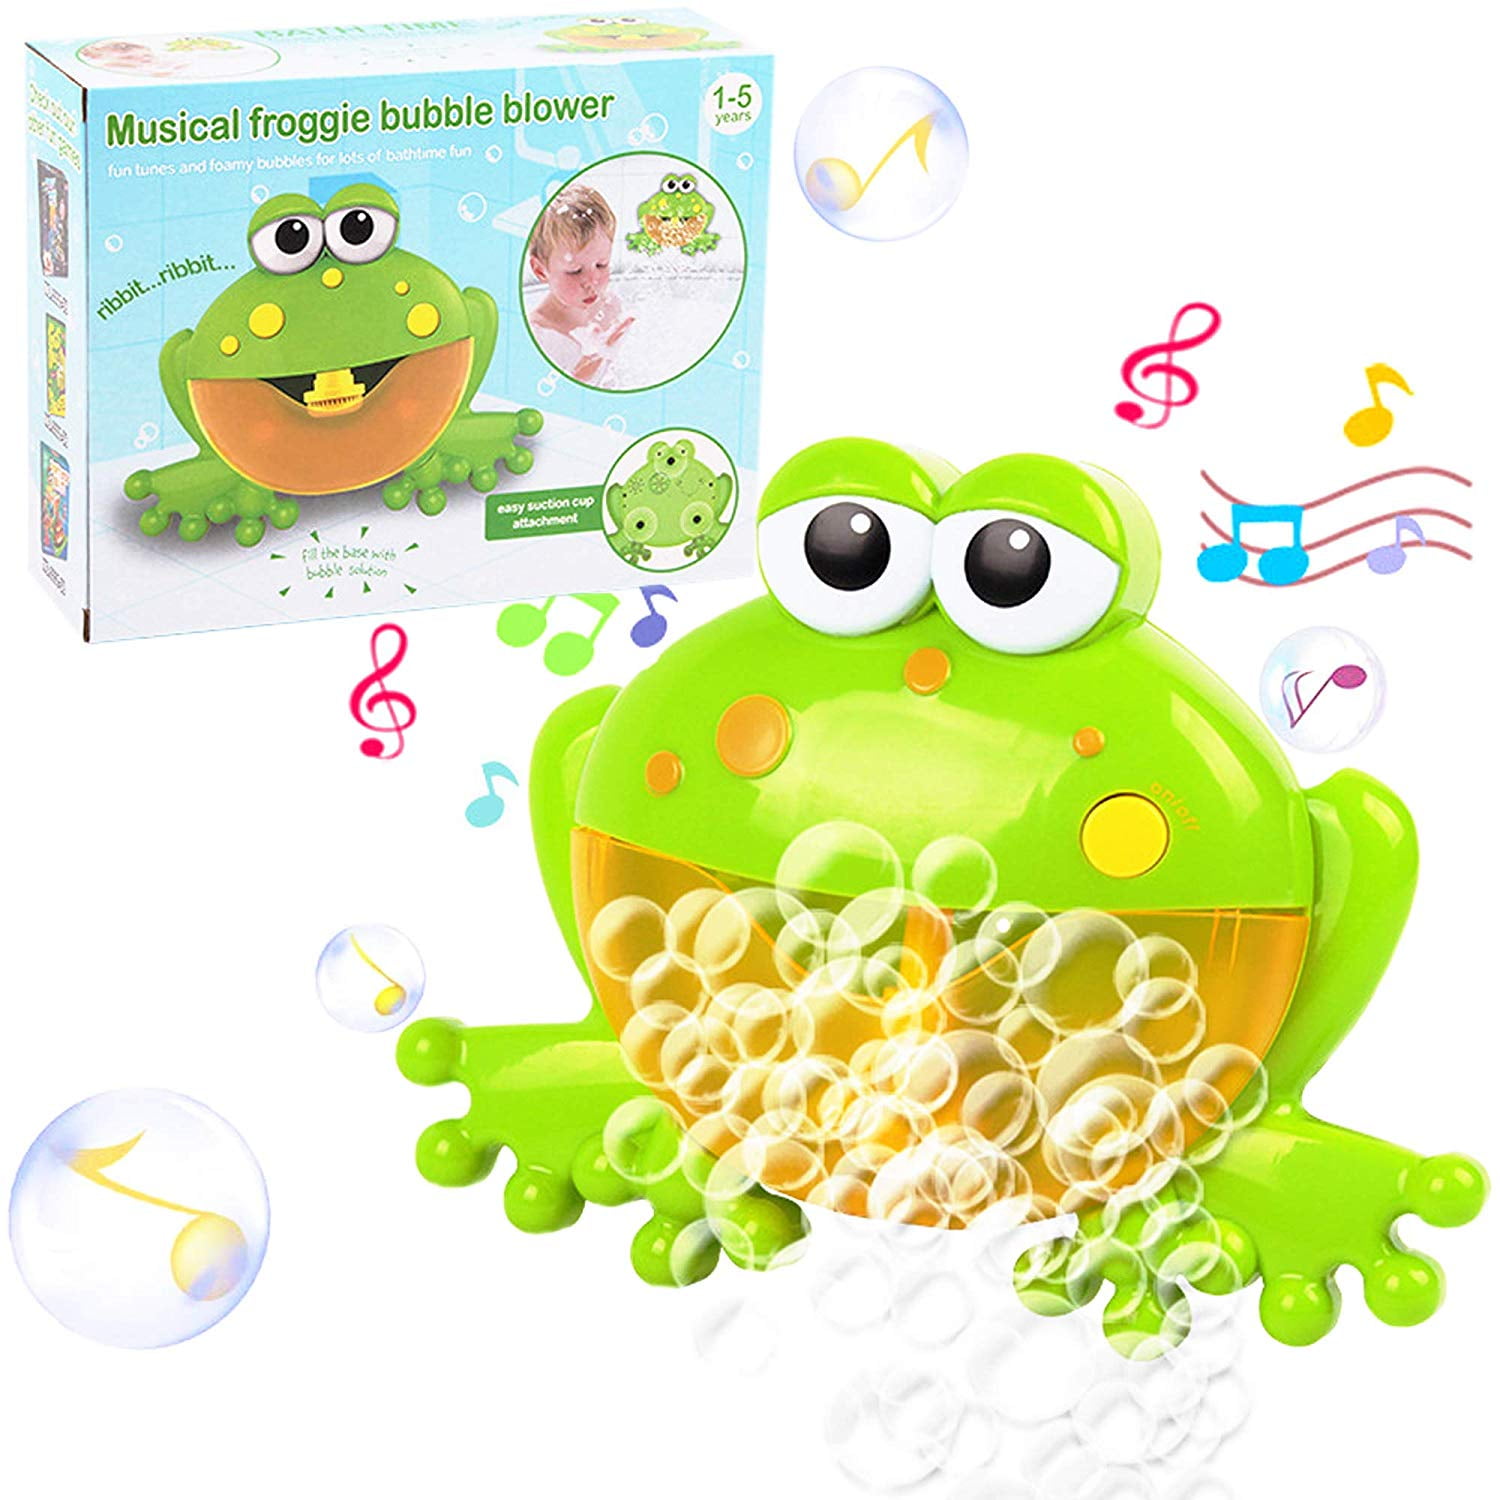 Frog Bubble Maker Machine Kids Toy Outdoors-indoors for sale online 